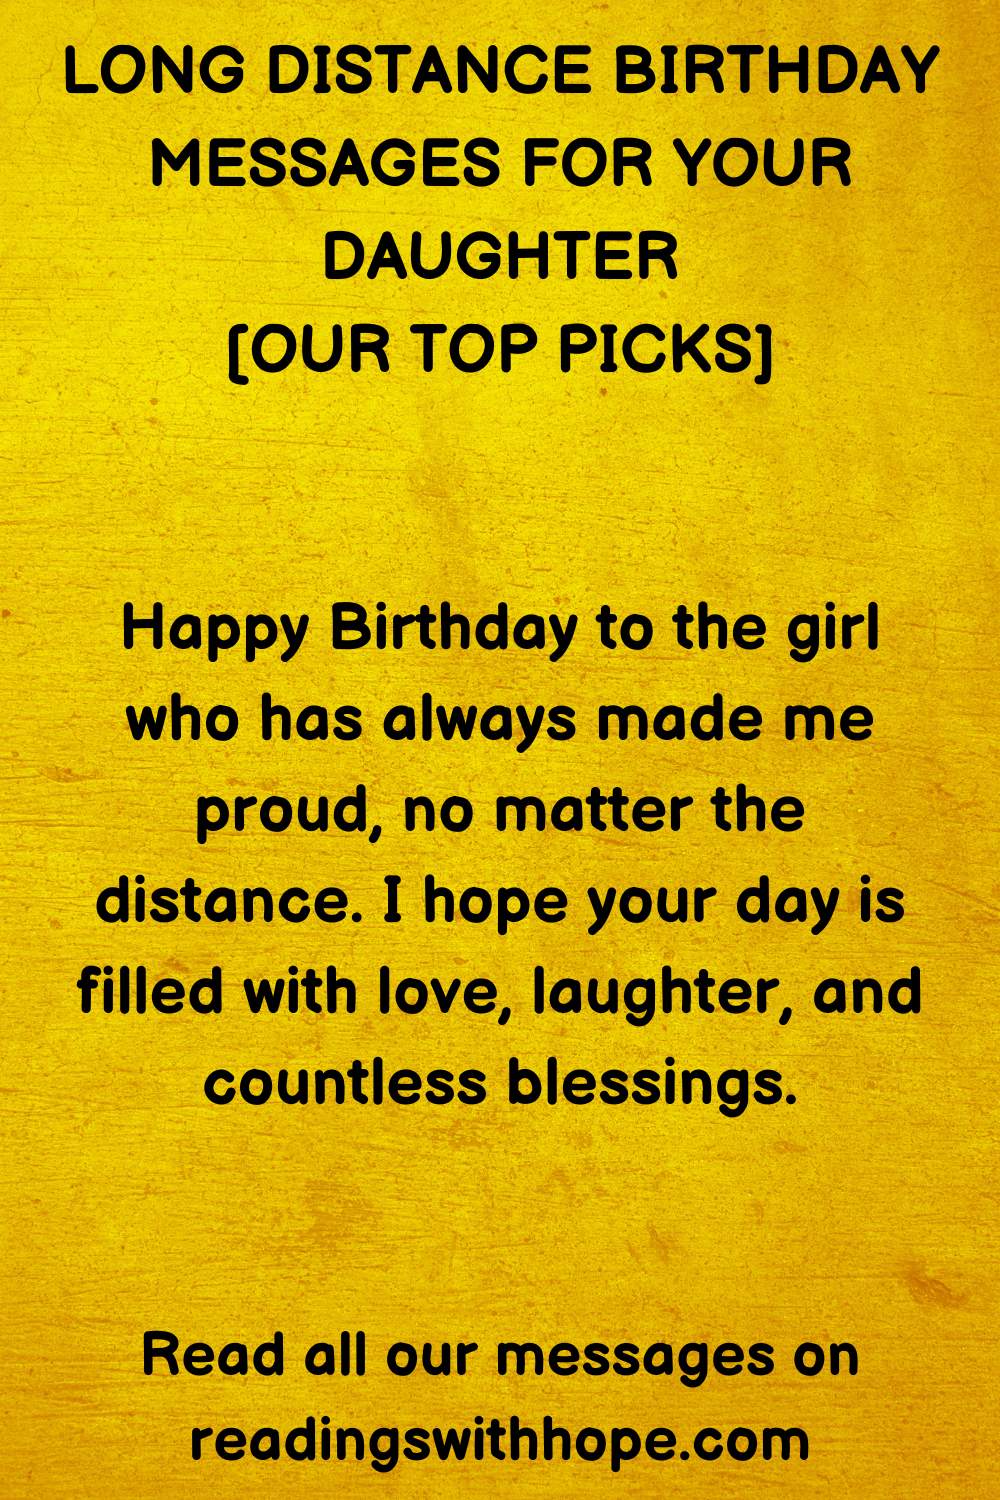 Long Distance Birthday Message for Your Daughter 2